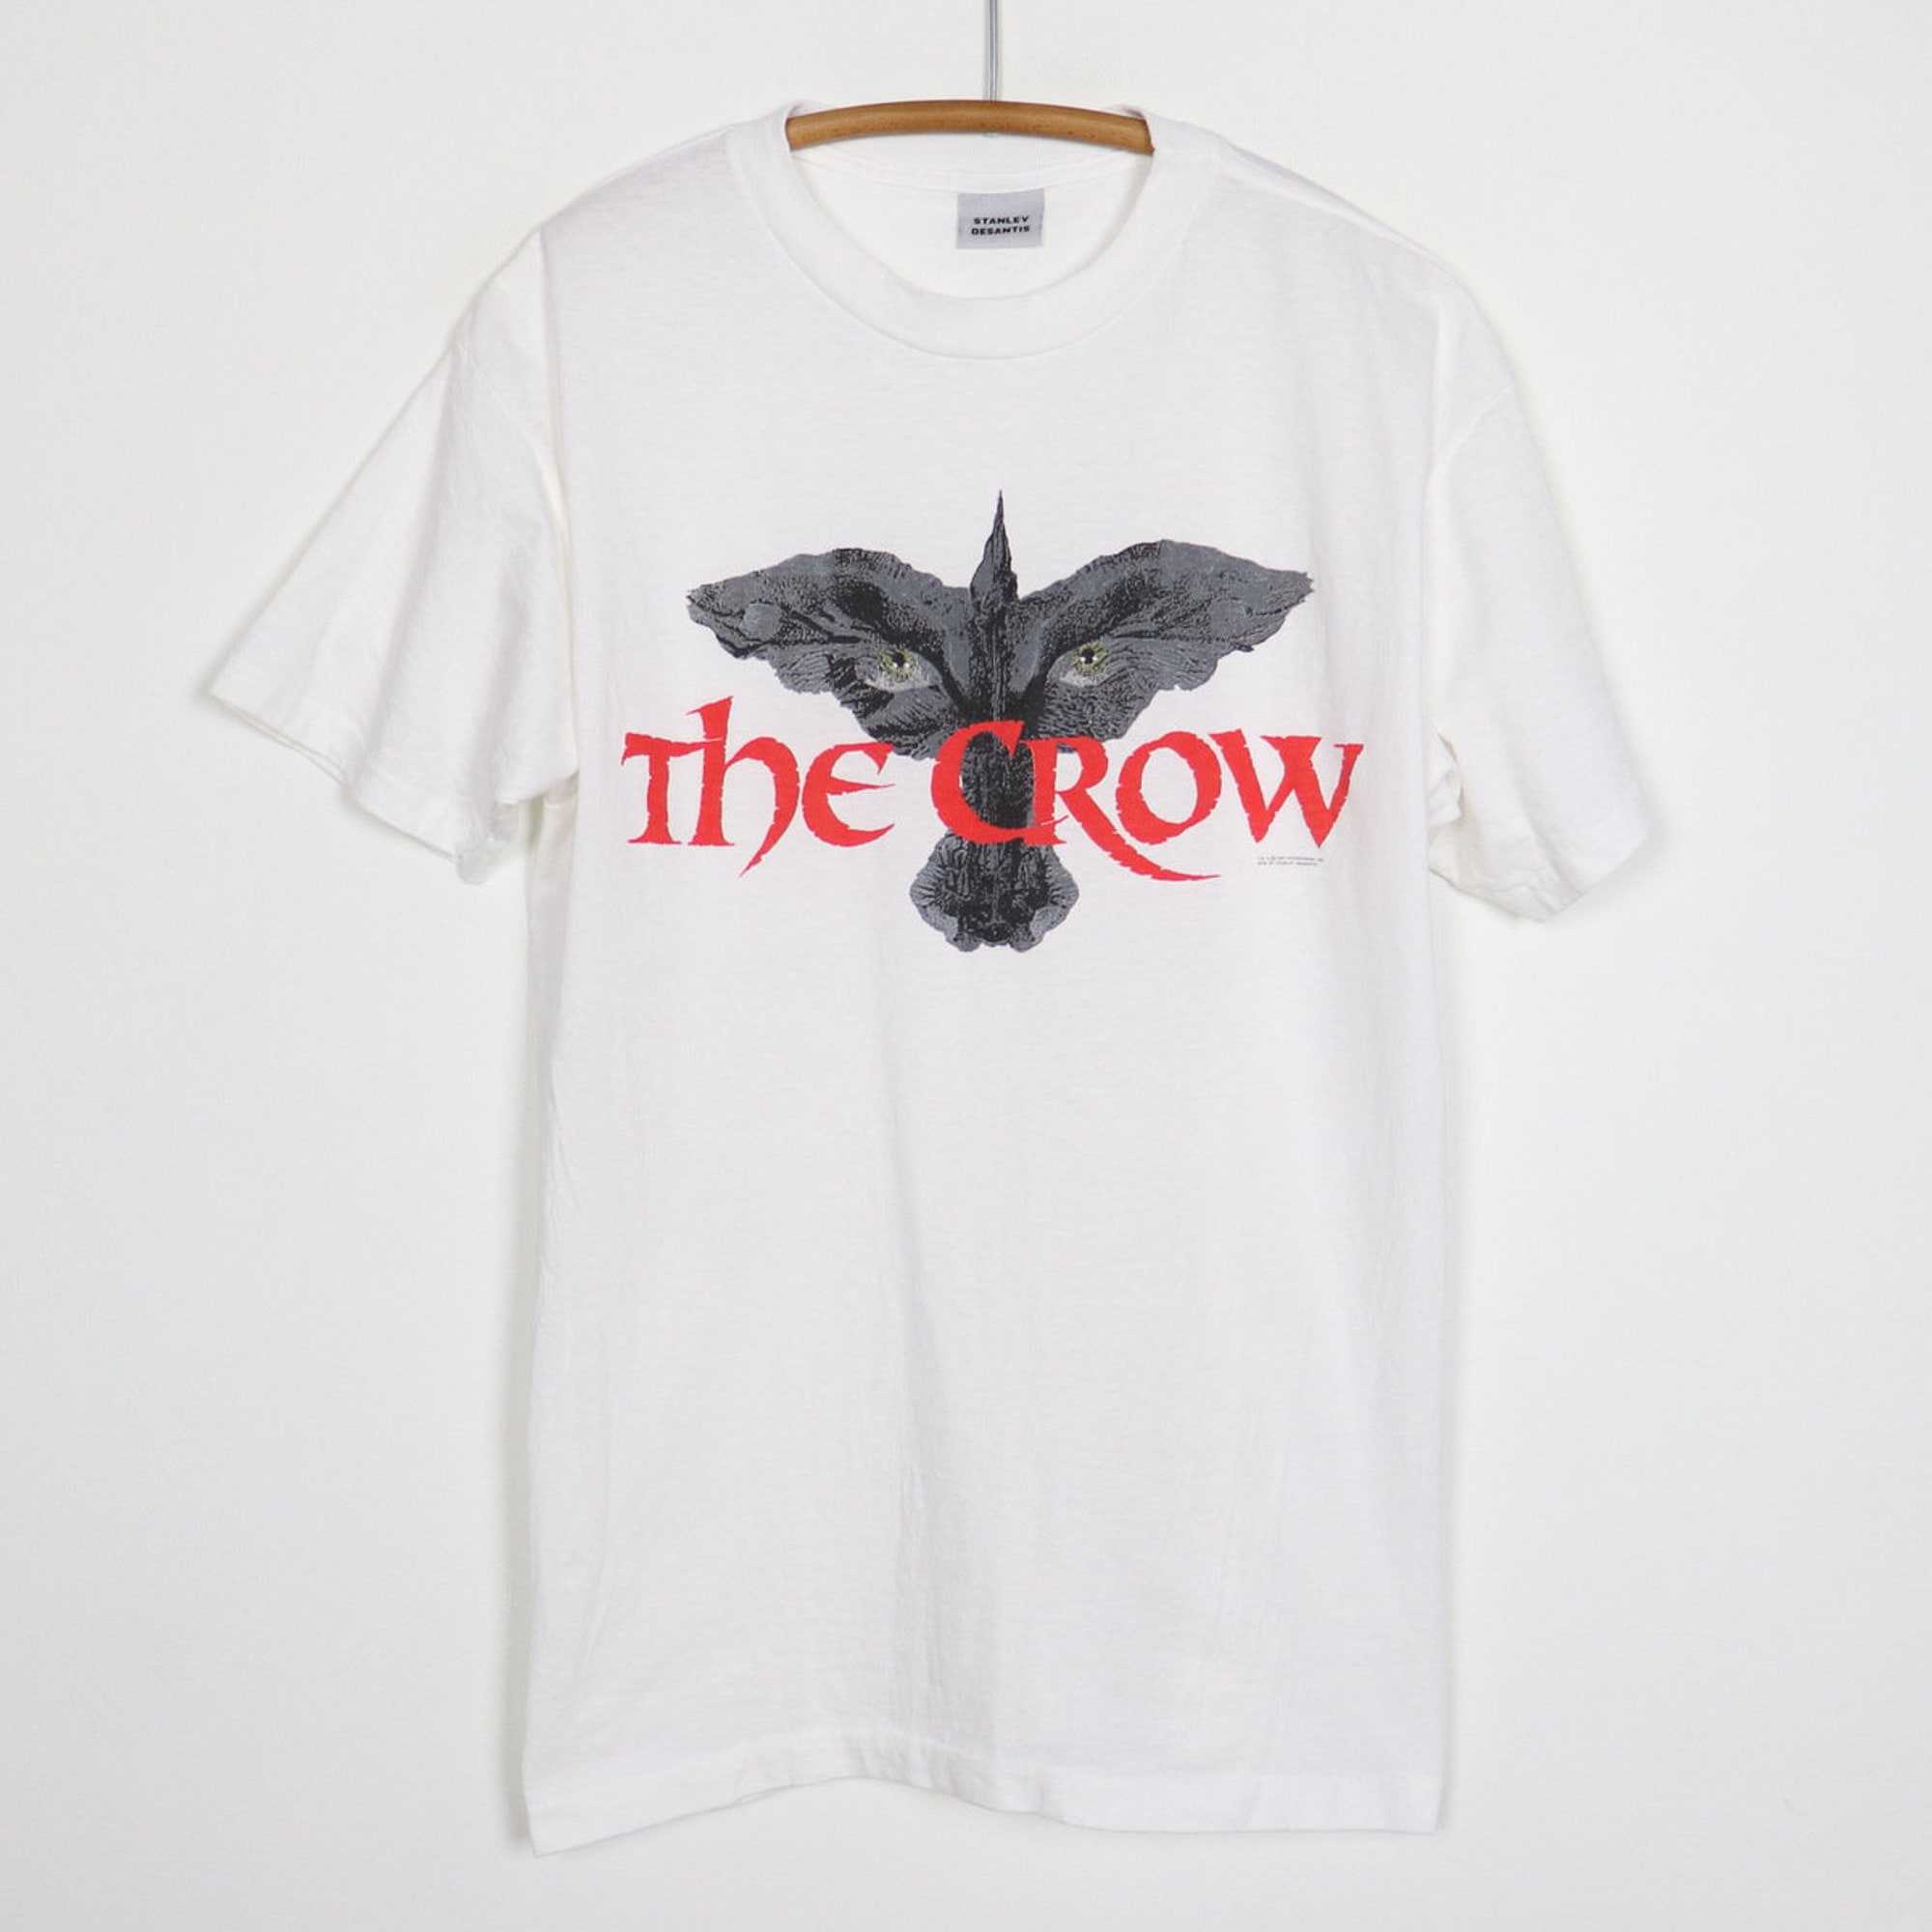 Discover vintage 1994 The Crow Movie Shirt